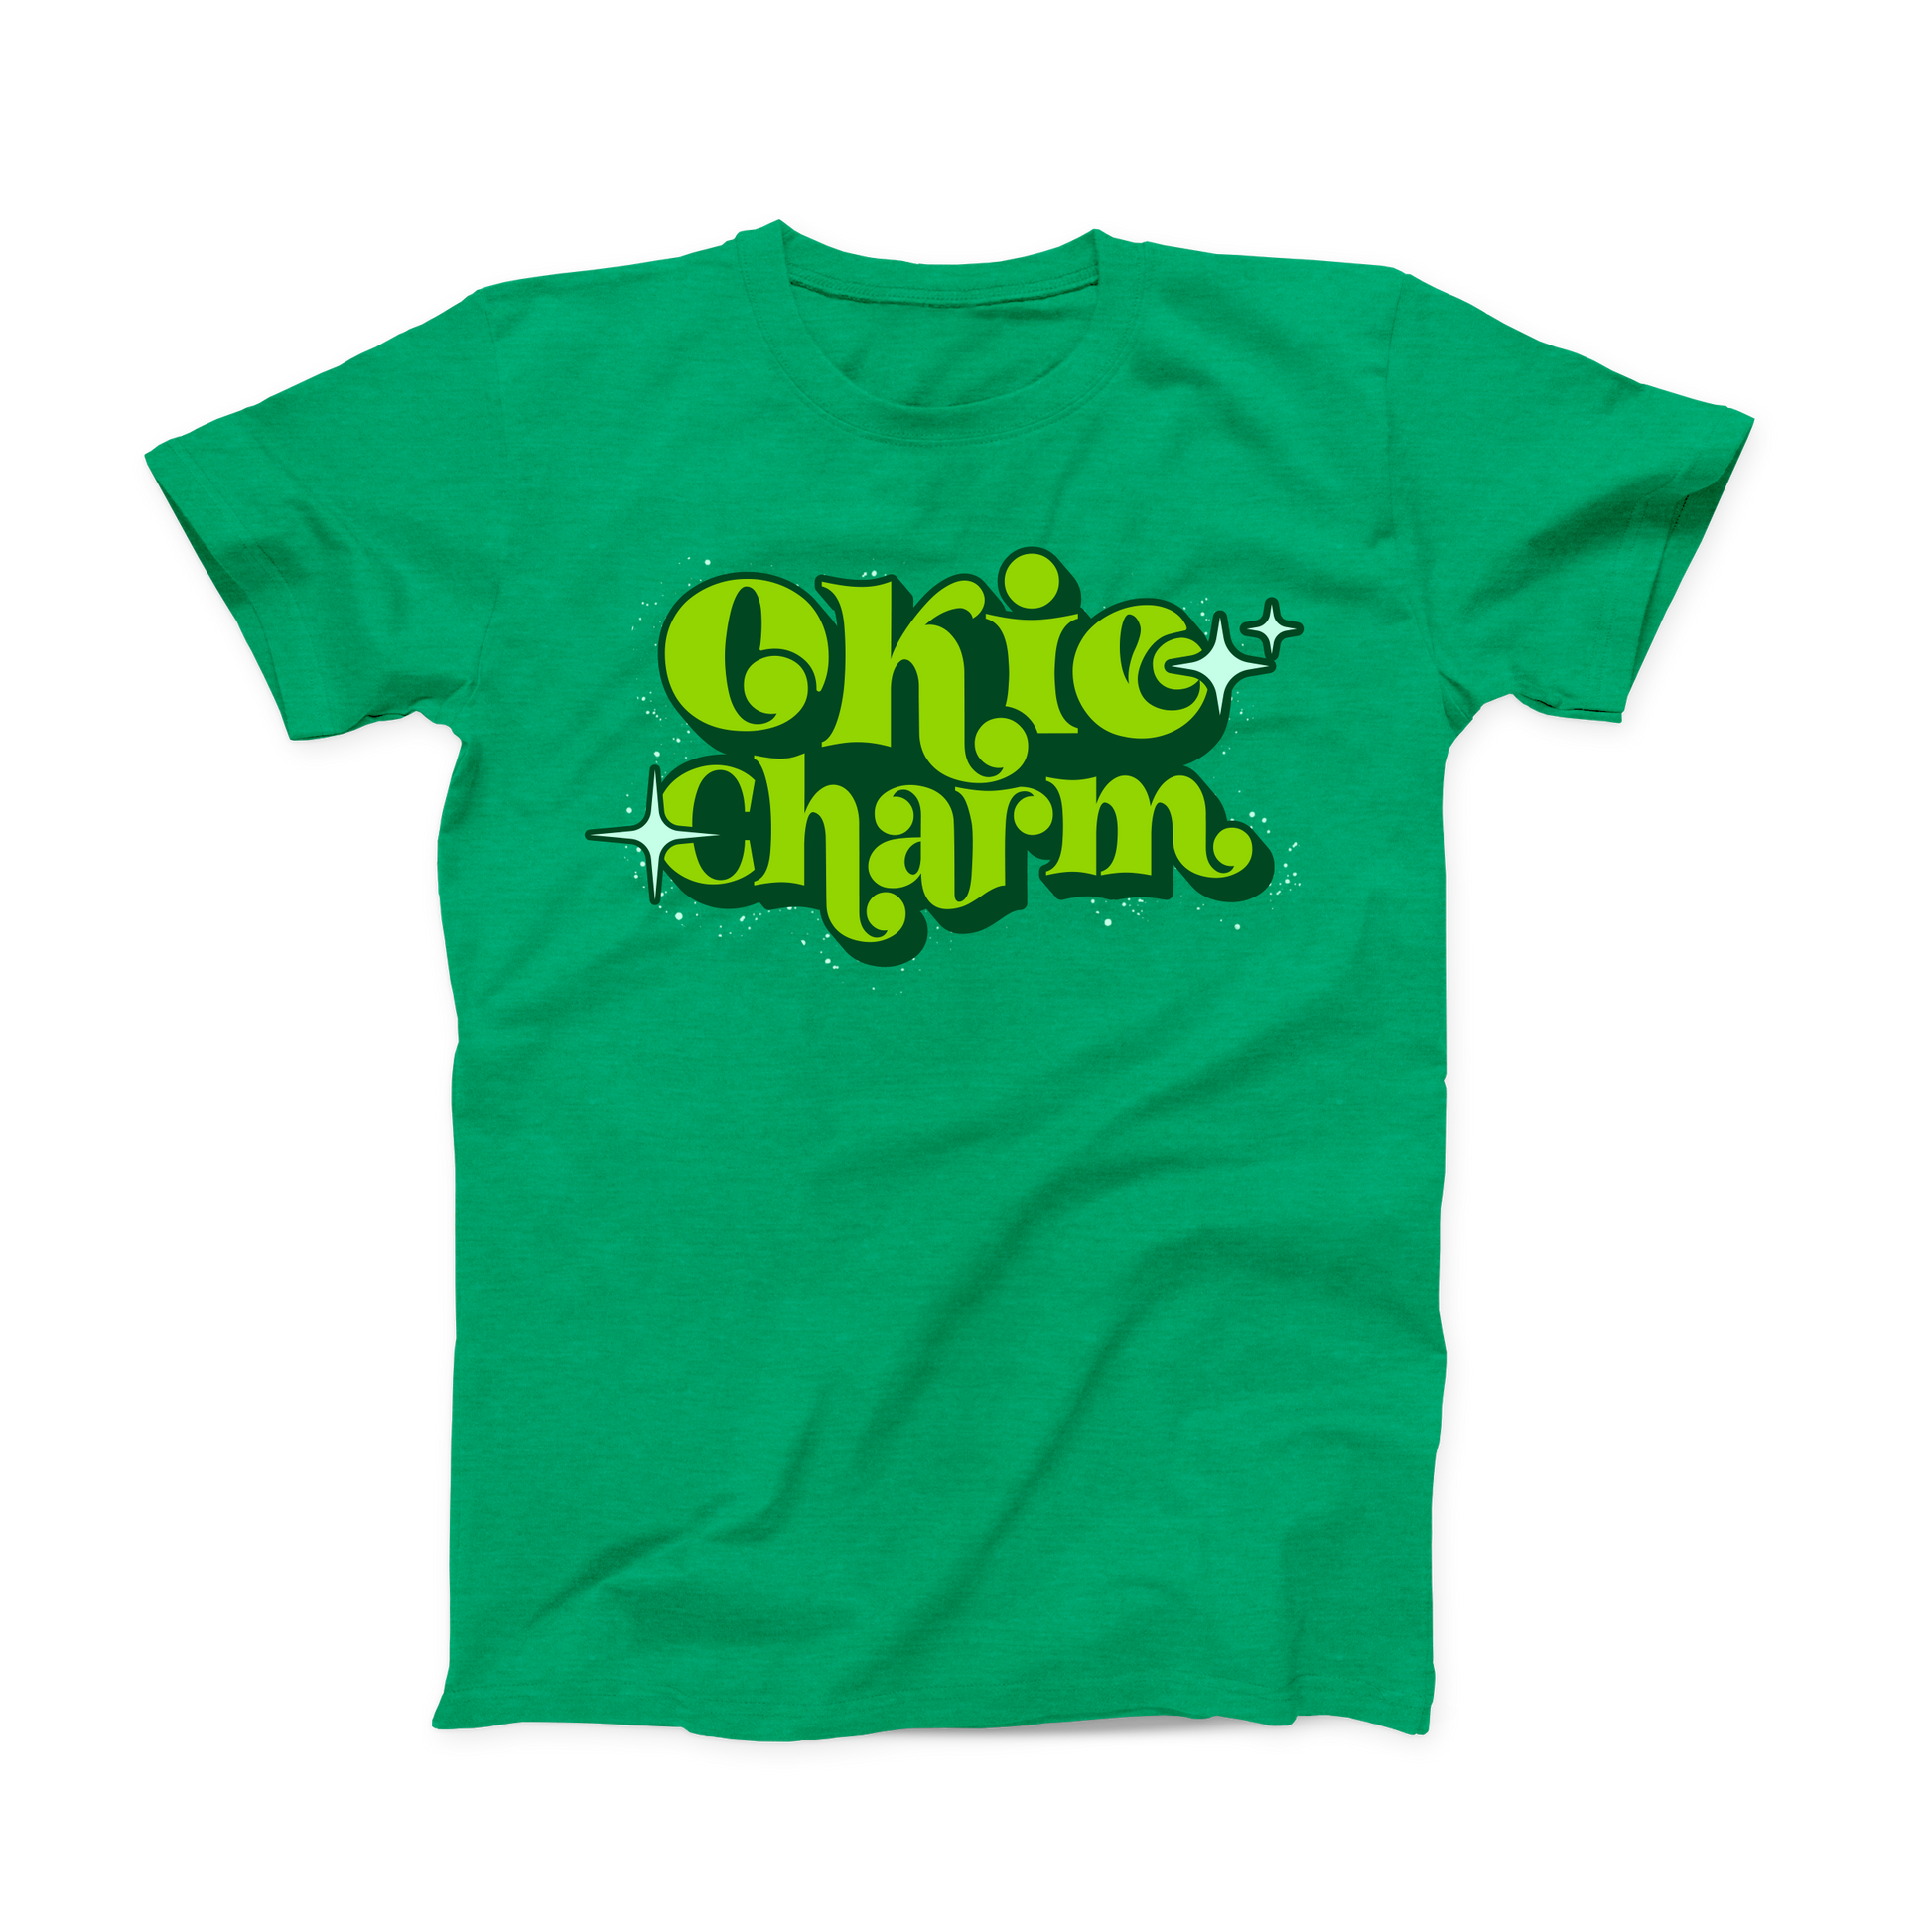 Kelly Green colored Oklahoma T-shirt. Stacked "Okie Charm" in the middle of the shirt in lime and dark green, with white stars around it.